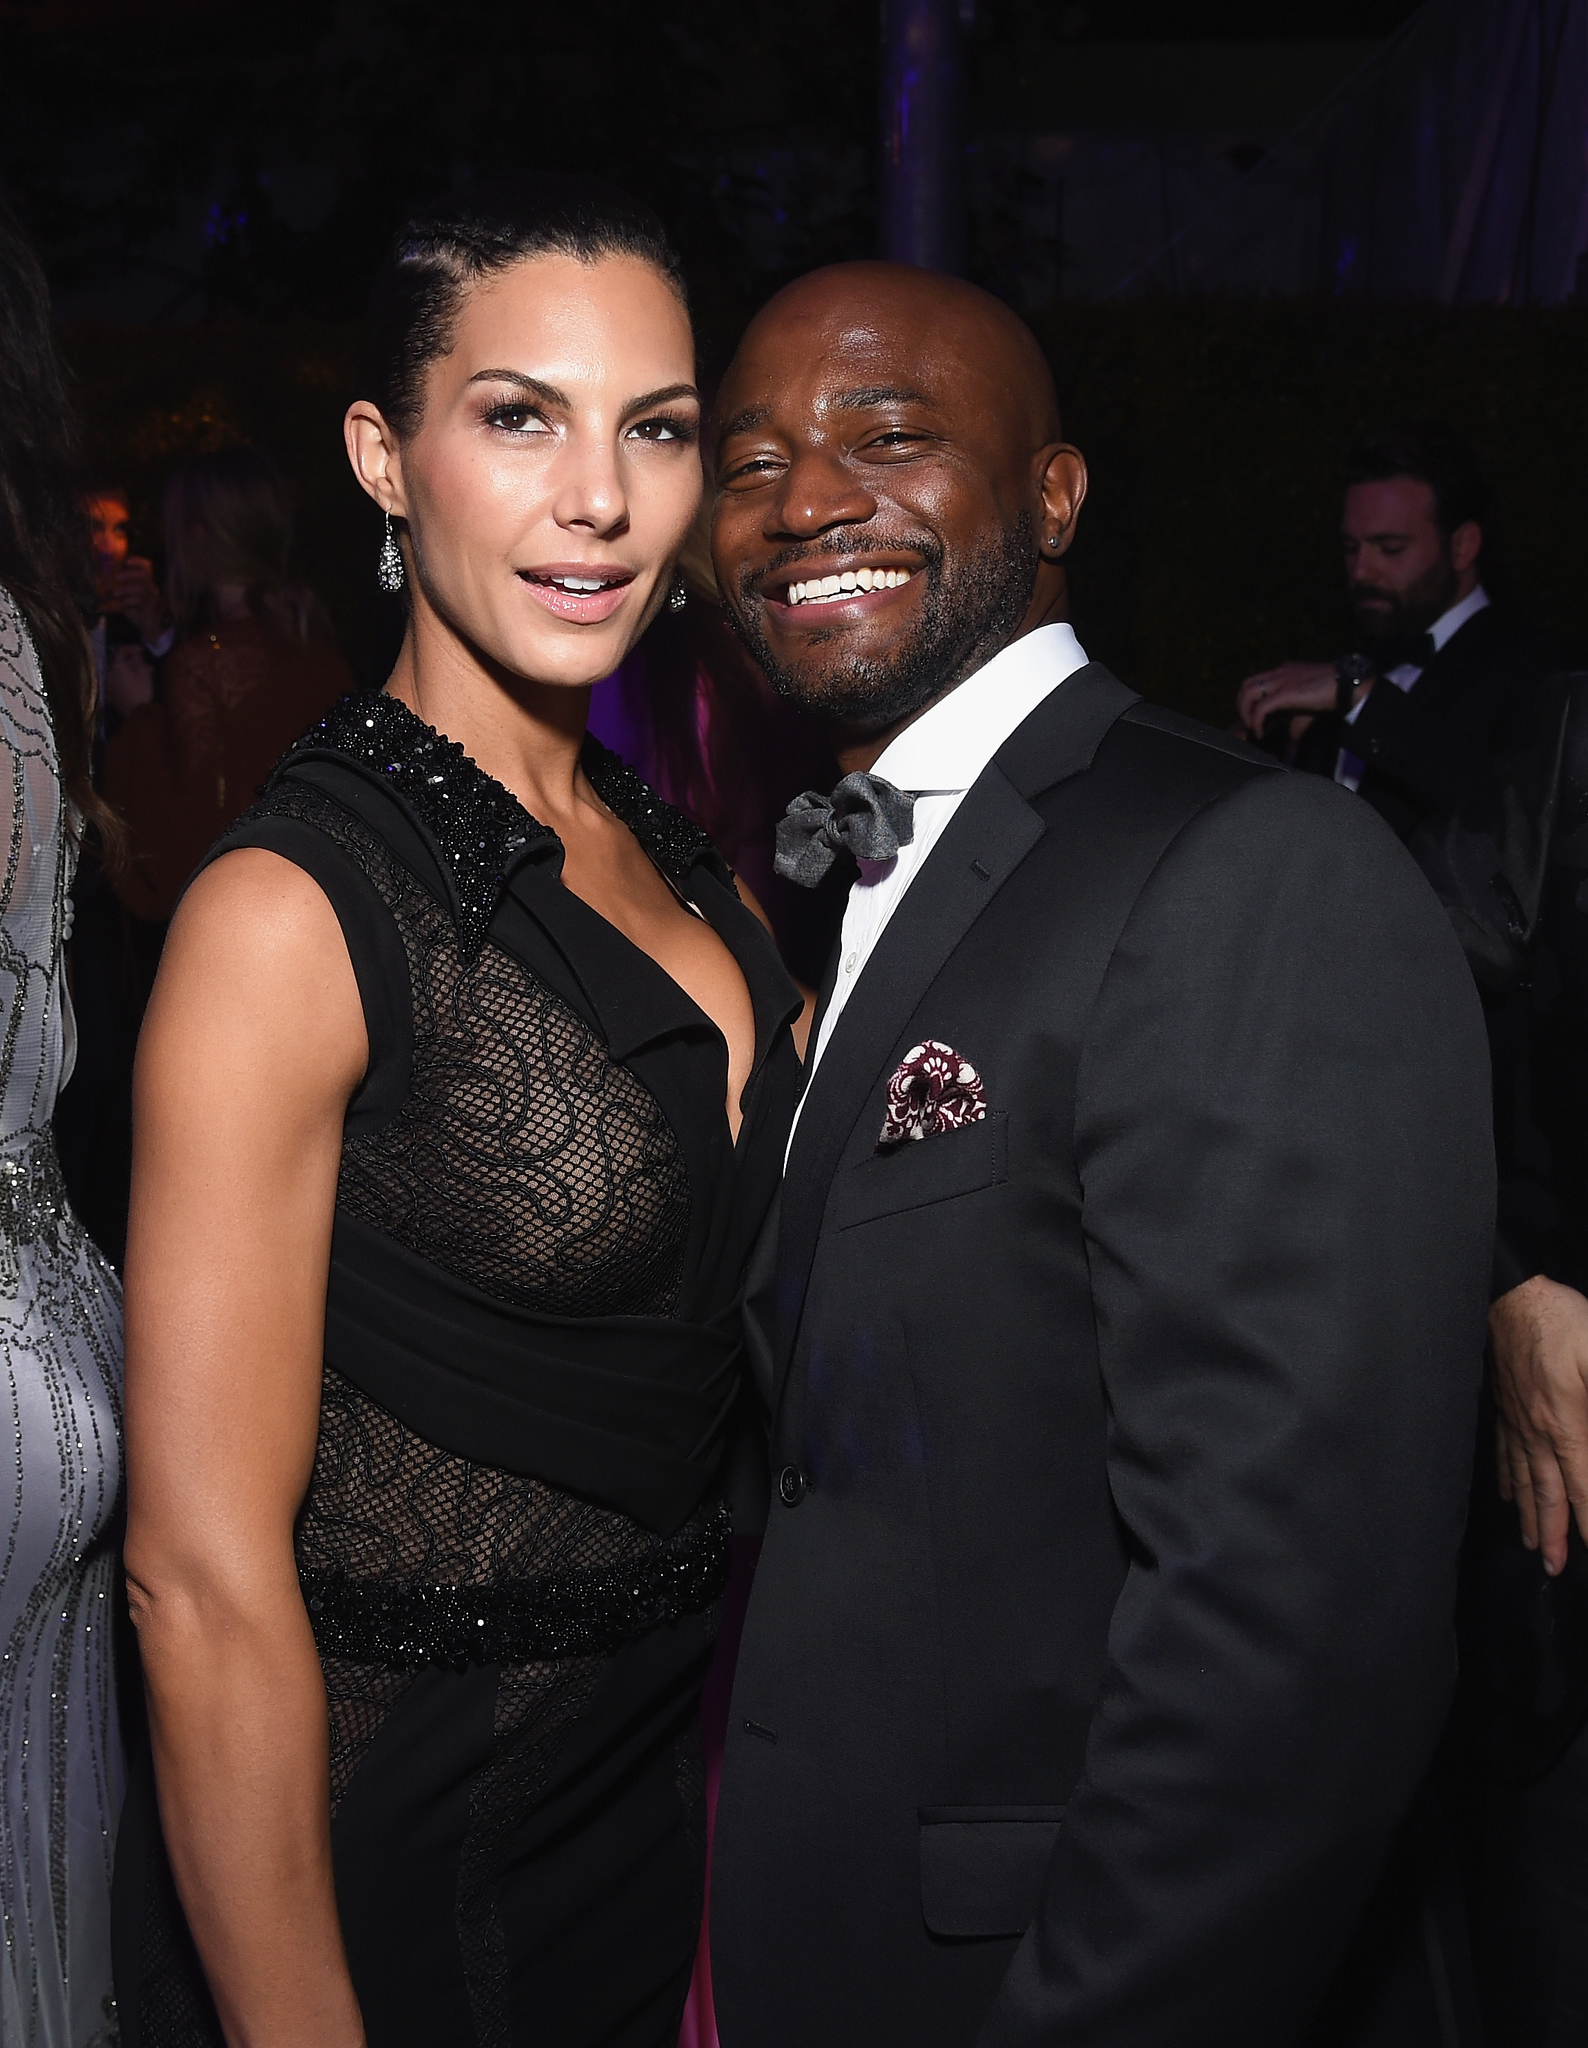 Taye Diggs at event of The Oscars (2015)